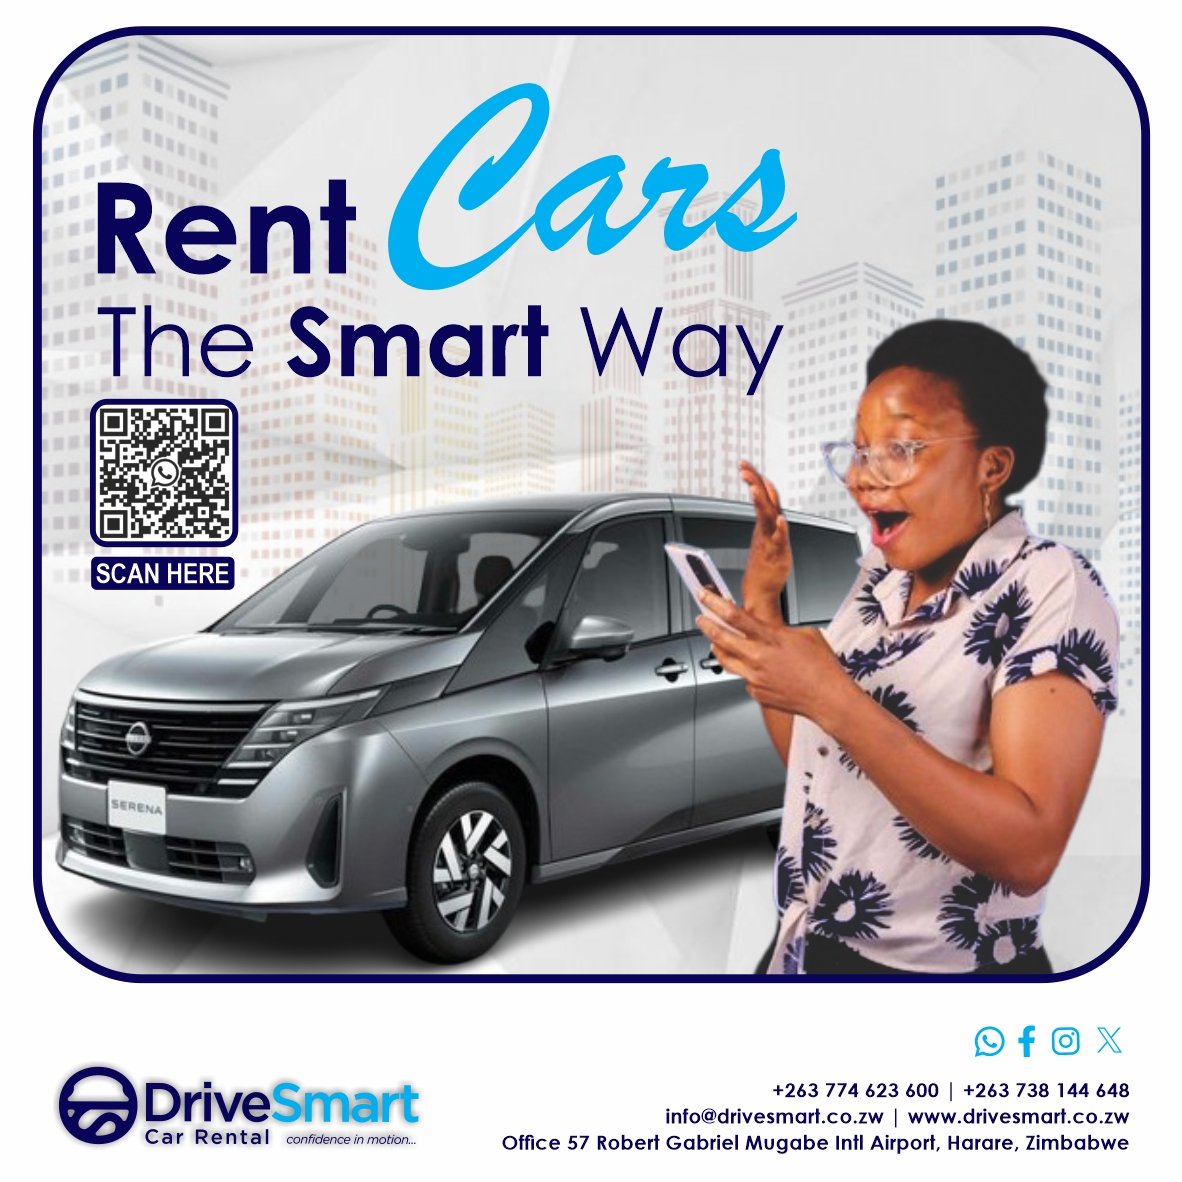 Are you looking for a spacious vehicle to hire for your trips with your family or friends? Drive Smart Car Rental is your plug. Go ahead and book your car hire today and enjoy your trips with our vehicles.

Contact us on!!!!
+263 774 623 600

#AirportTransfers
#DriveSmart